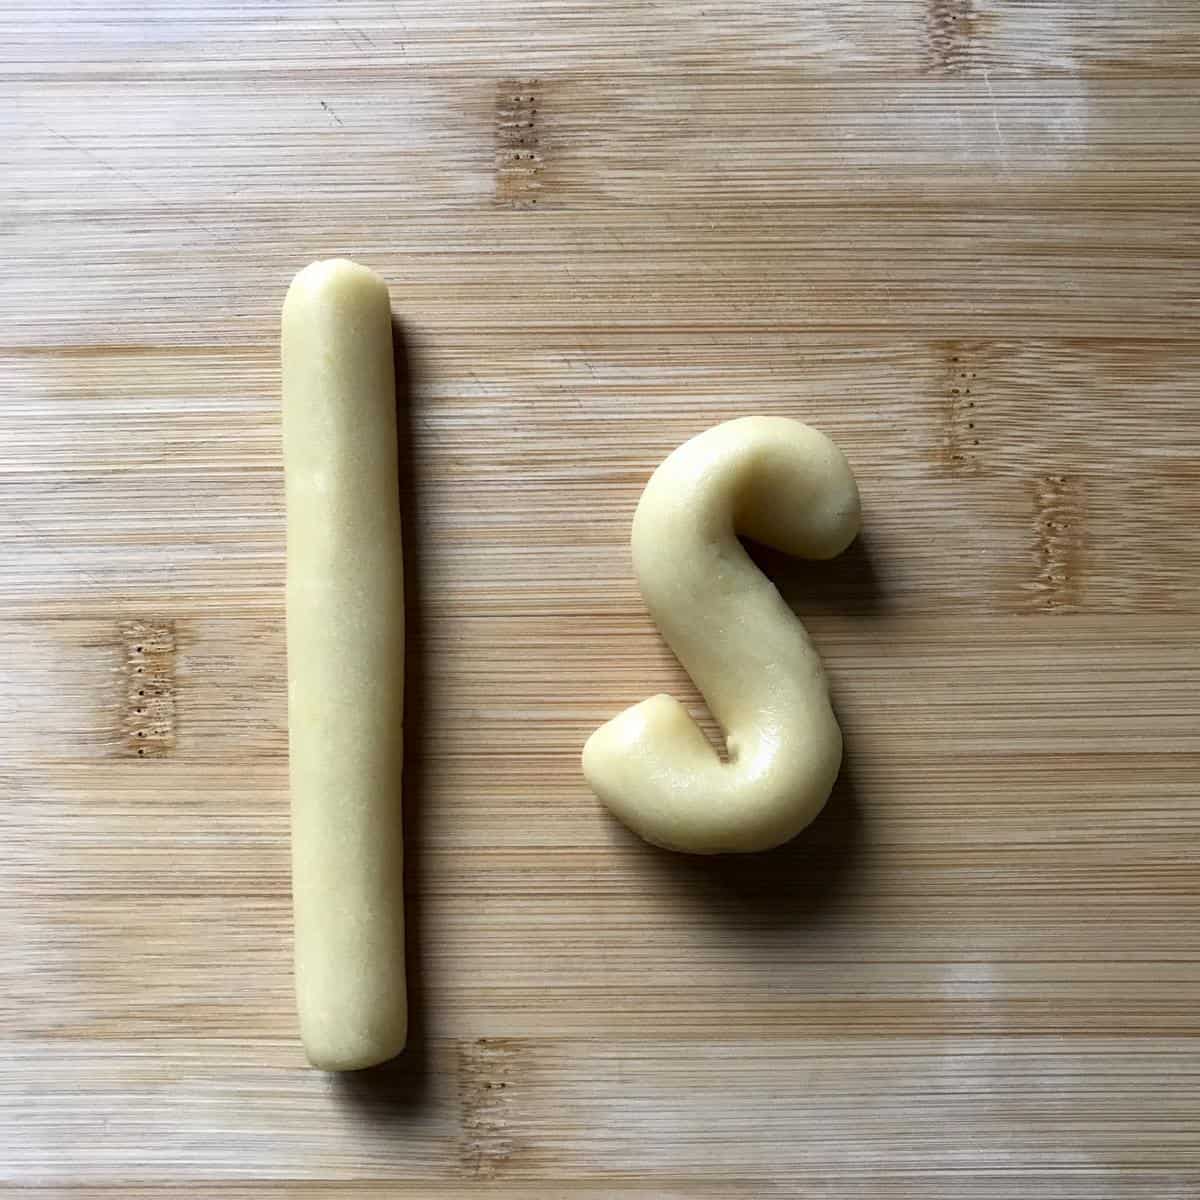 The cookie dough rolled into a log, next to a formed S cookie.